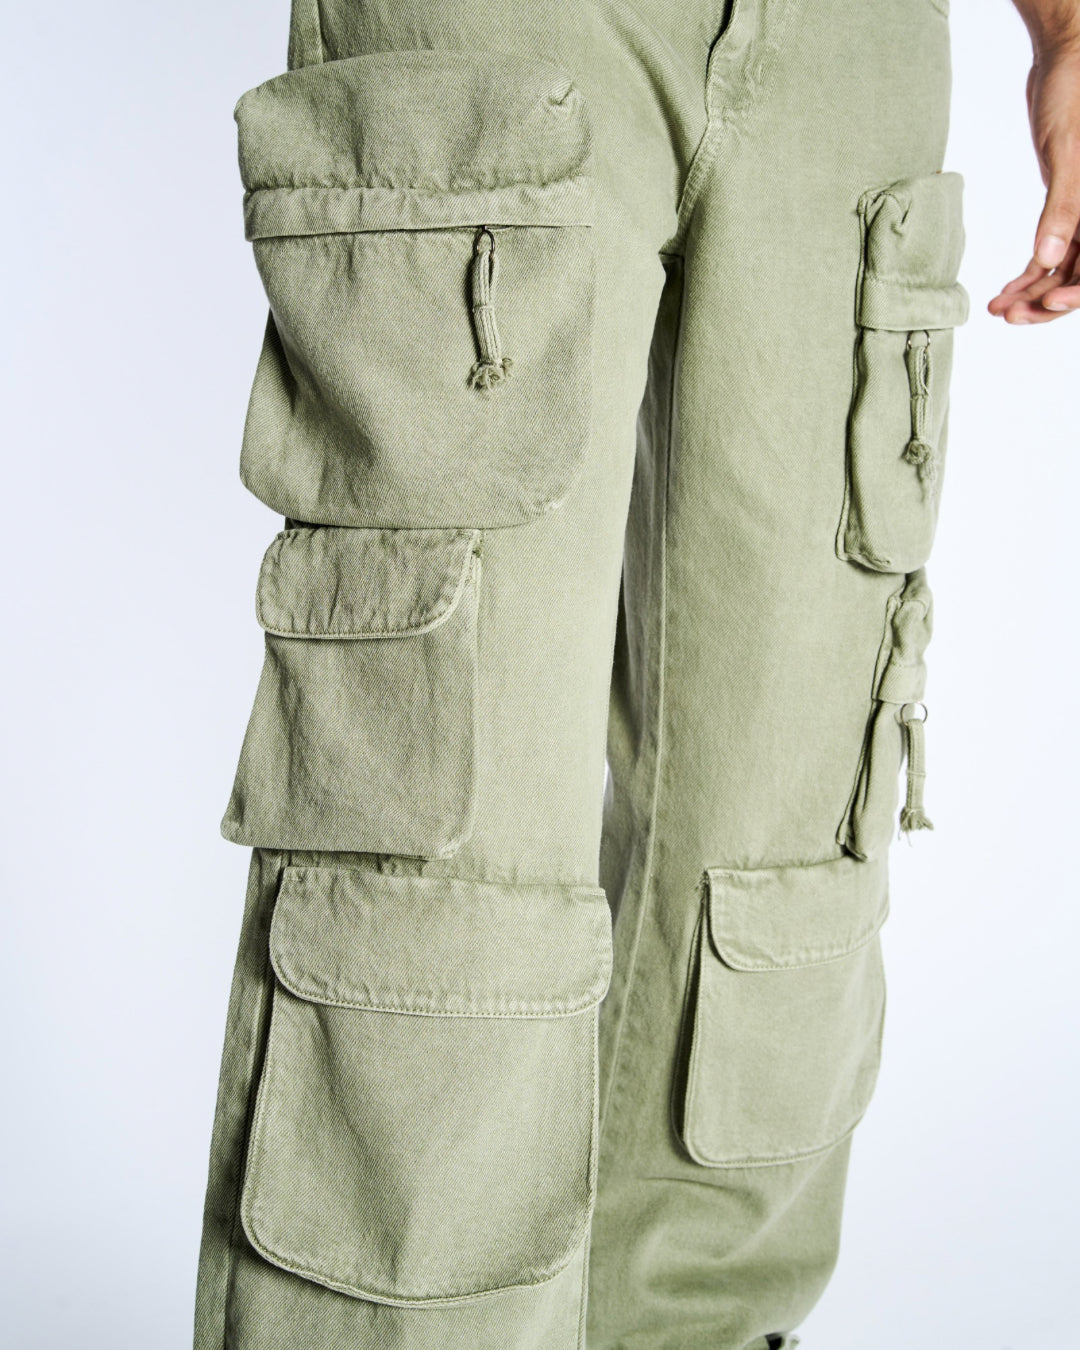 Green Utility Jeans With Pockets